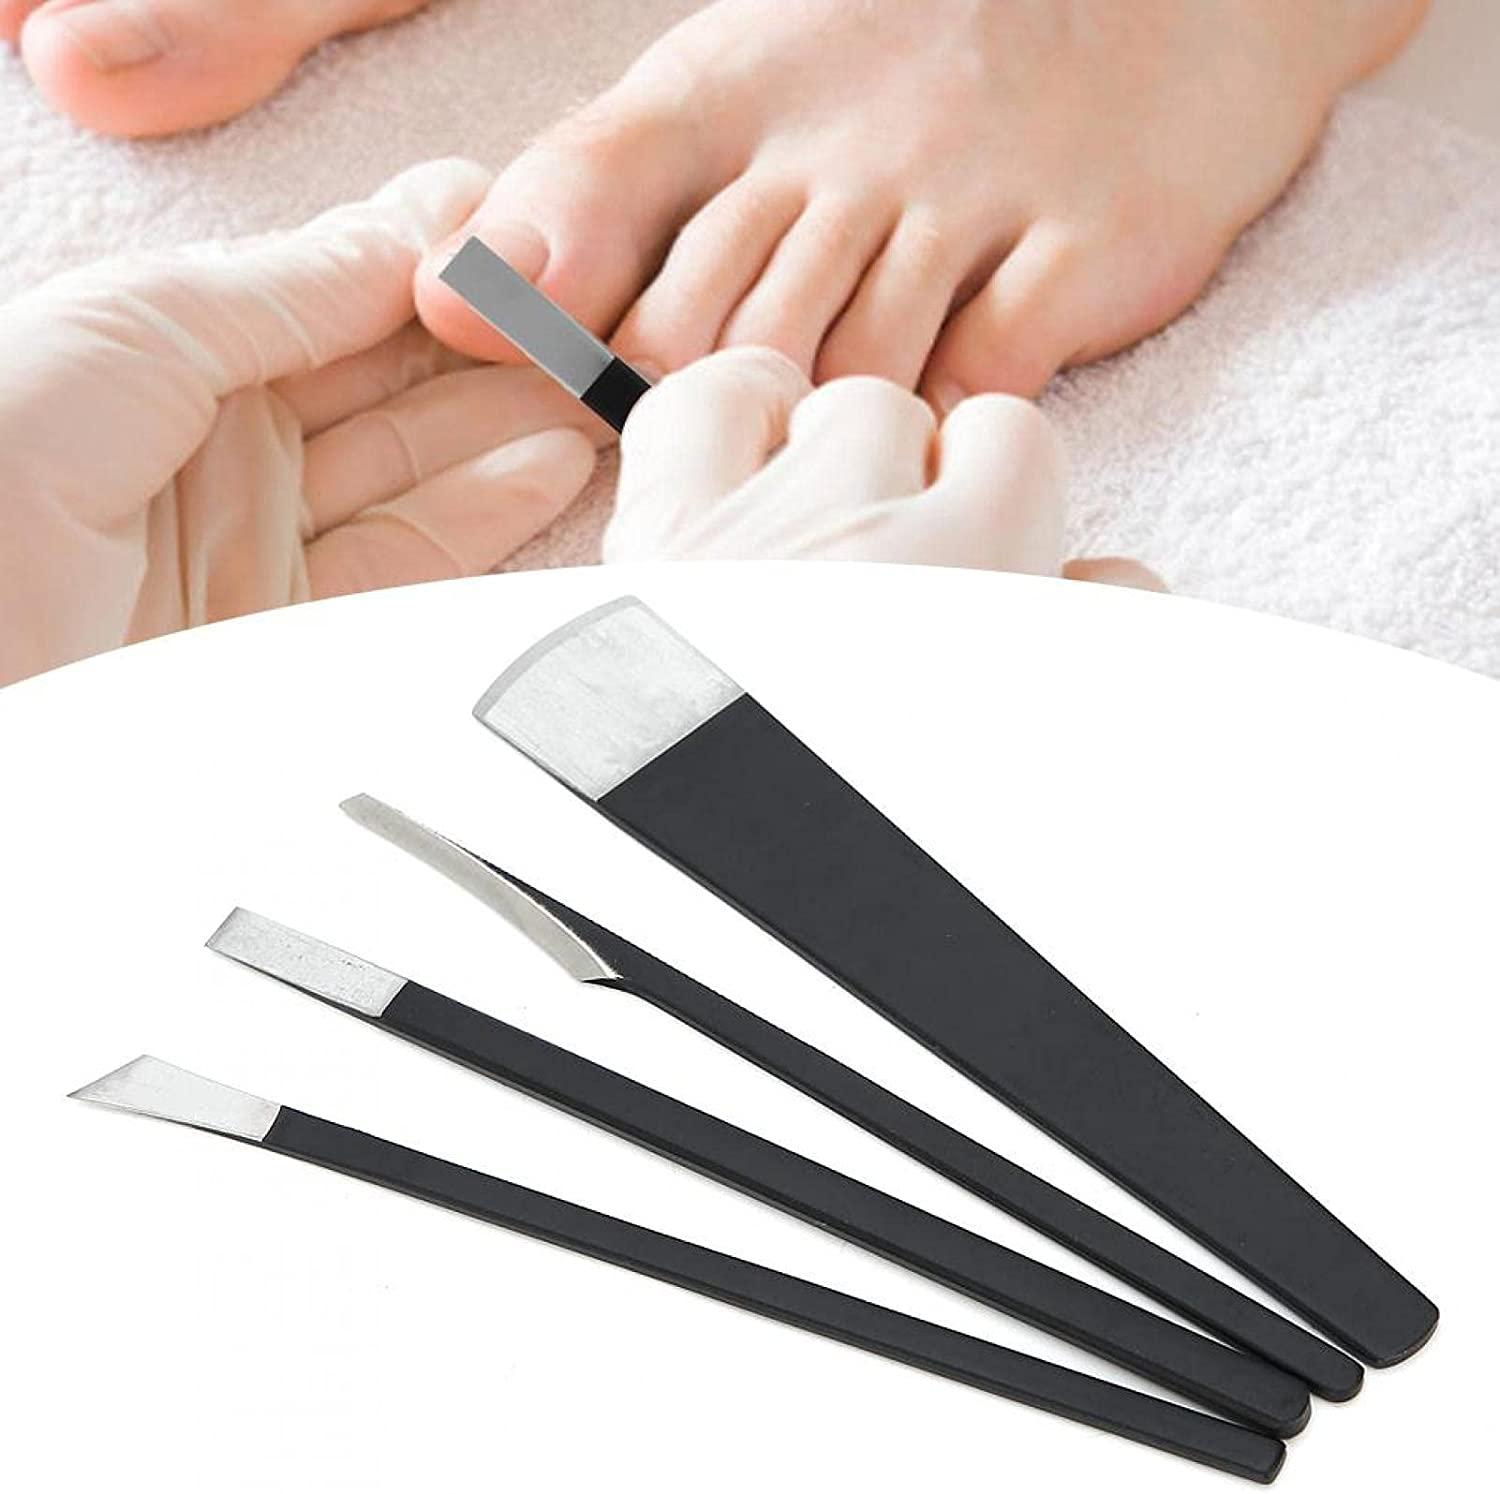 New Pedicure Knife Foot Sharpeners, Stainless Steel Pedicure File Foot Care